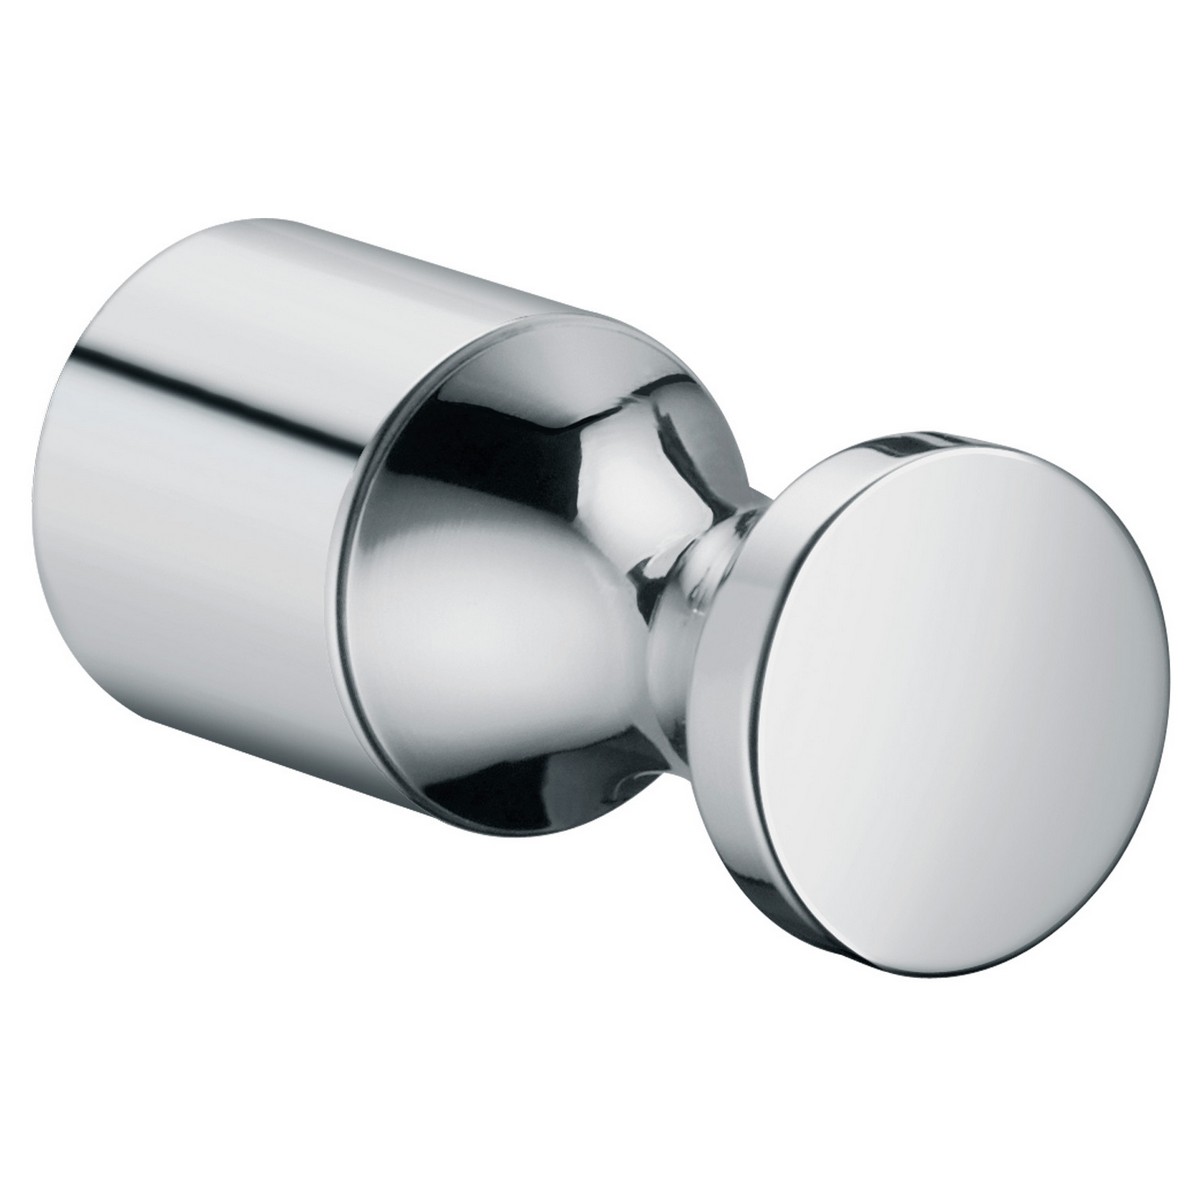 KEUCO 11614010000 ELEGANCE 5/8 INCH WALL MOUNTED TOWEL HOOK IN POLISHED CHROME